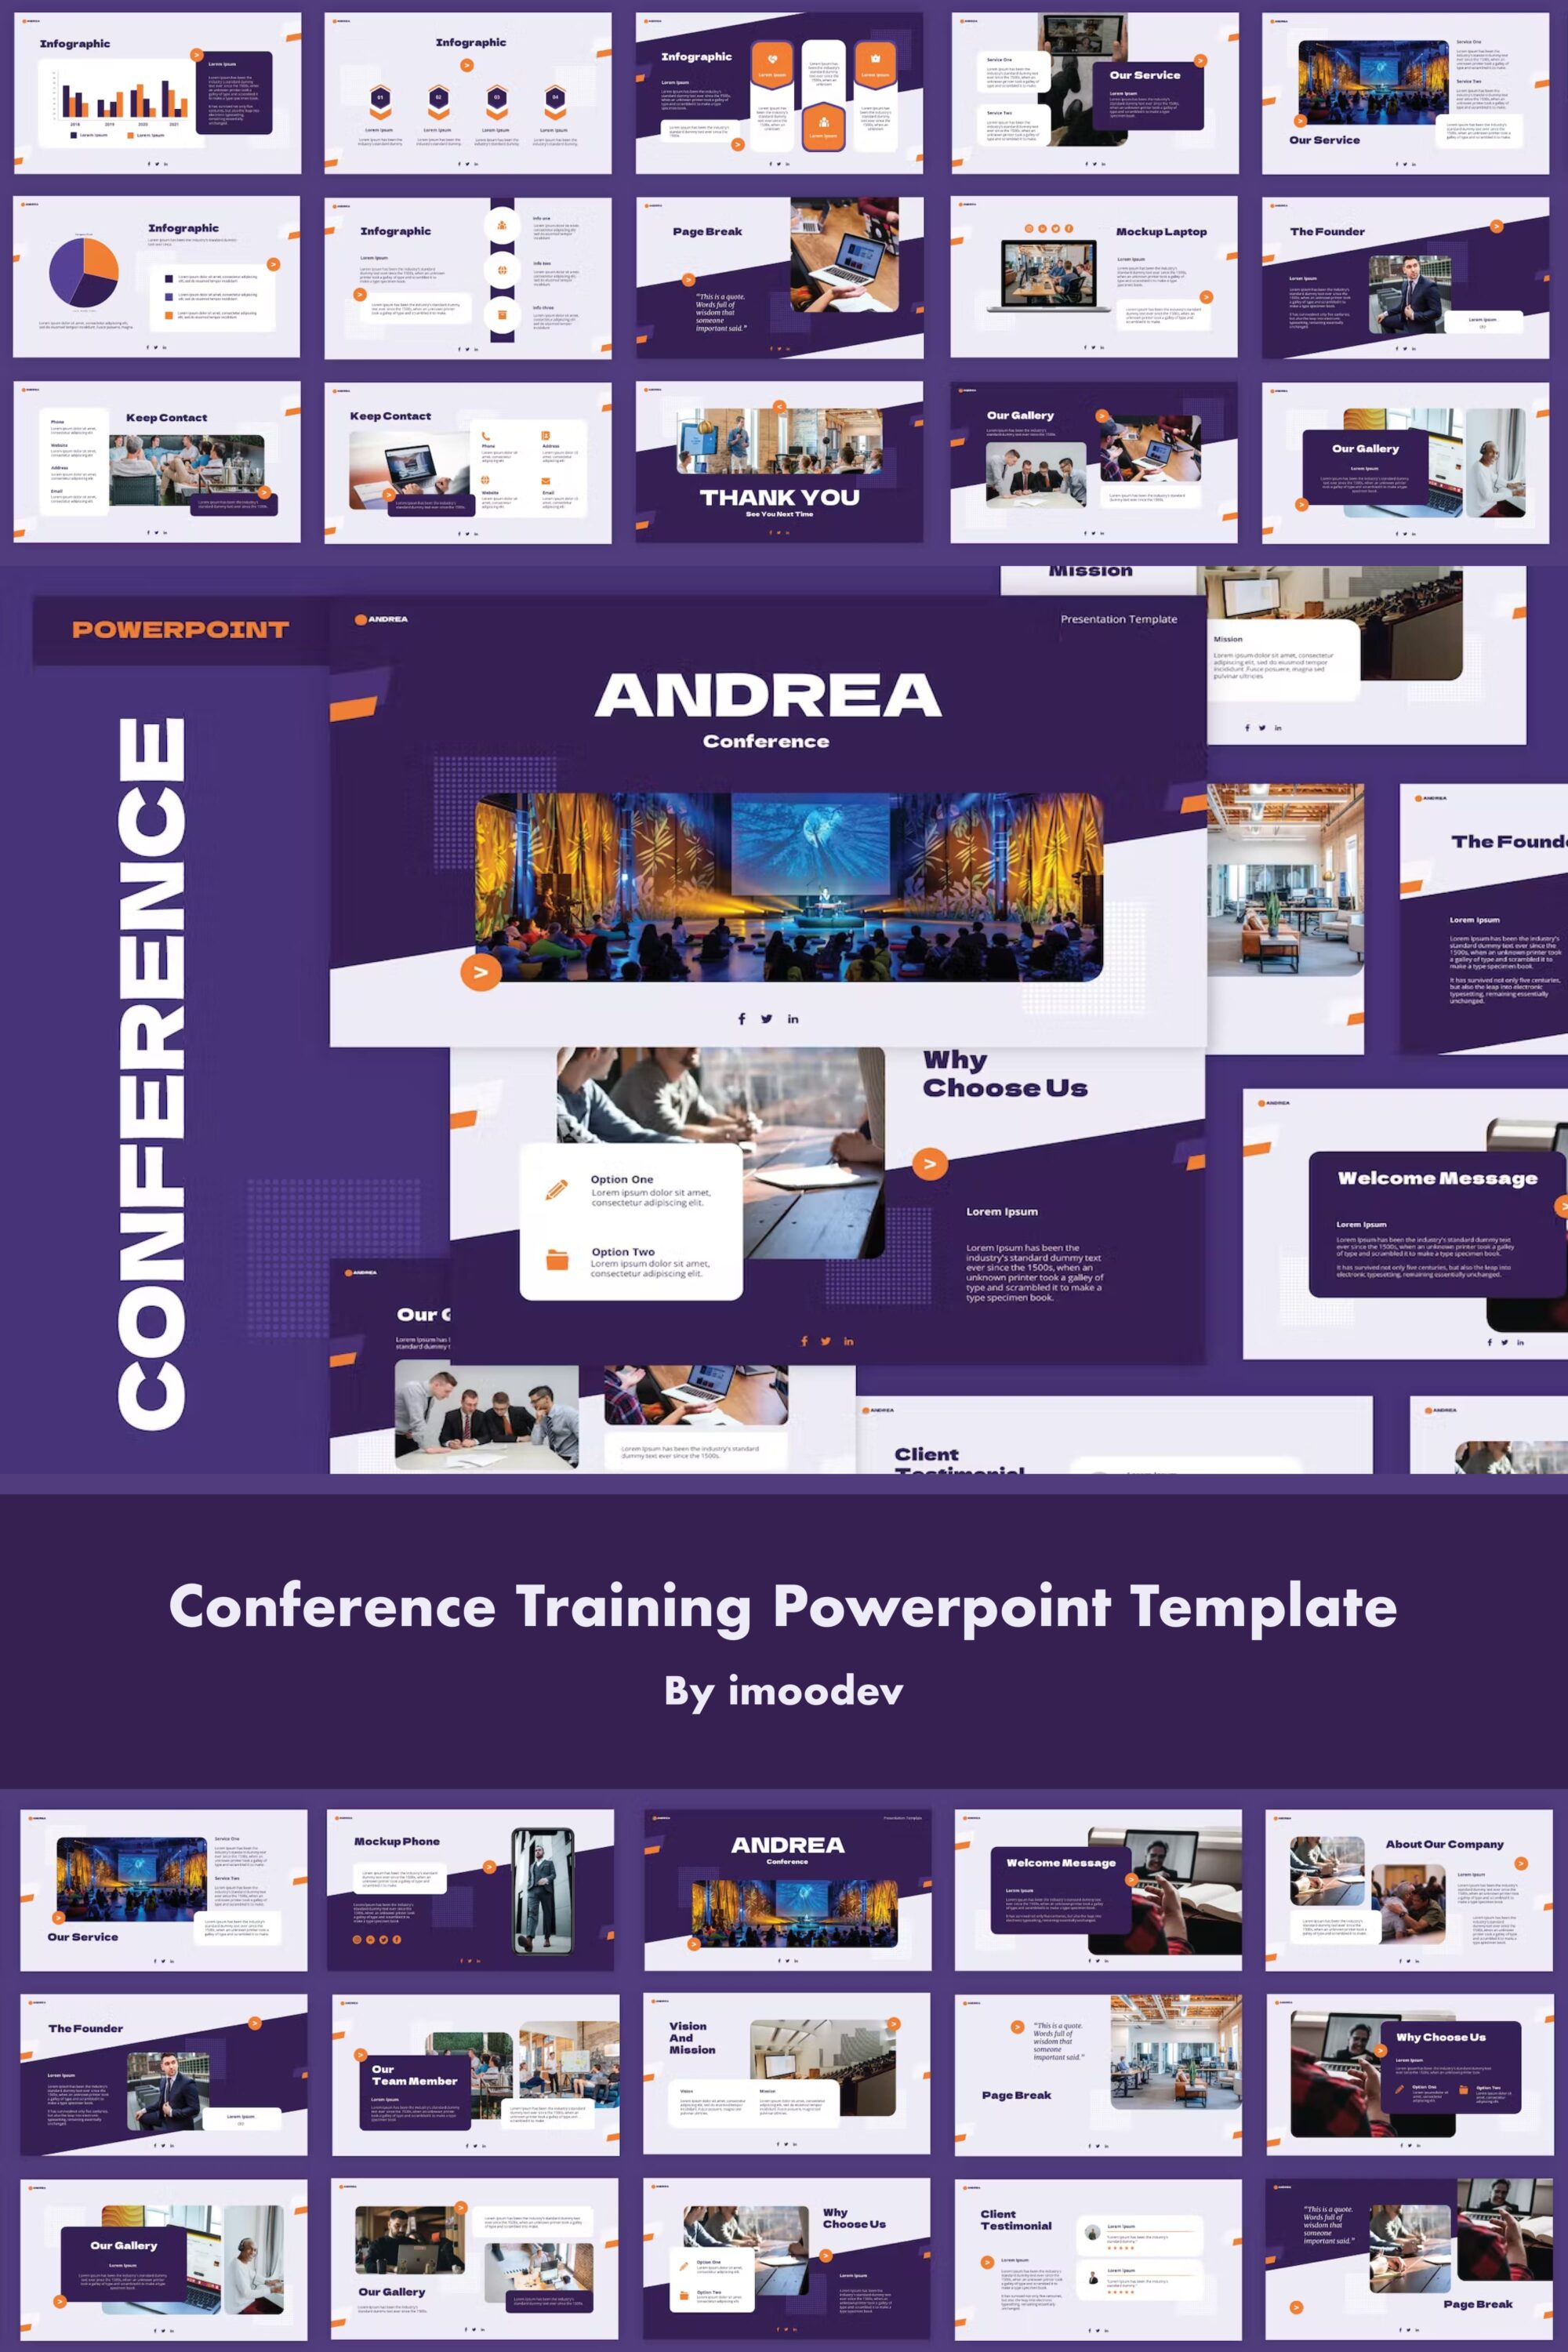 Conference training powerpoint template of pinterest.